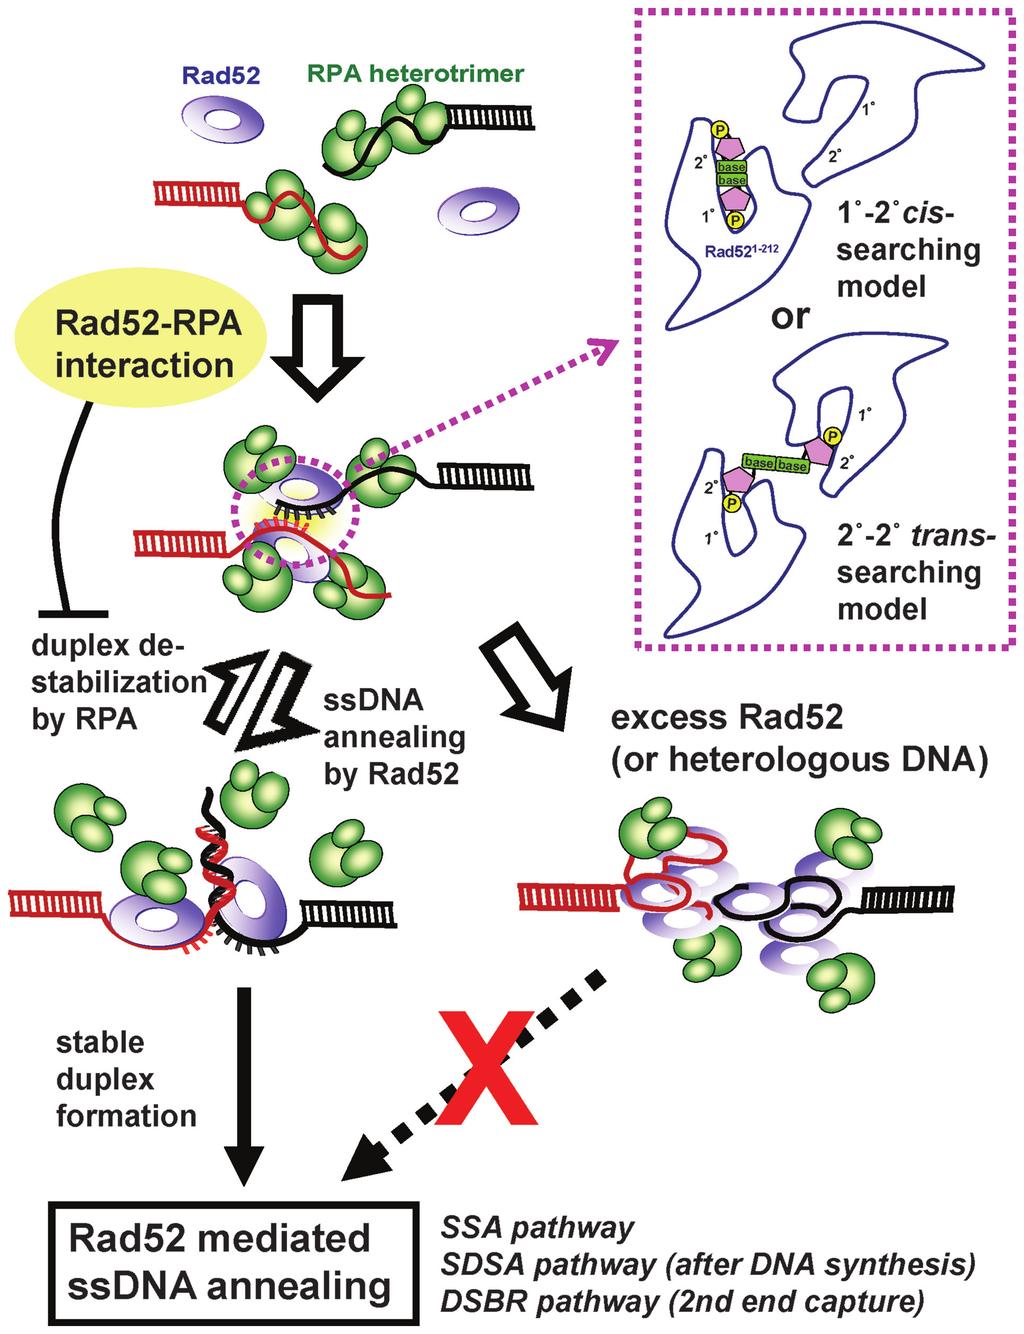 2928 Nucleic Acids Research, 2010, Vol. 38, No. 9 Figure 5. Model for DNA binding and annealing by hrad52 in the presence of hrpa.